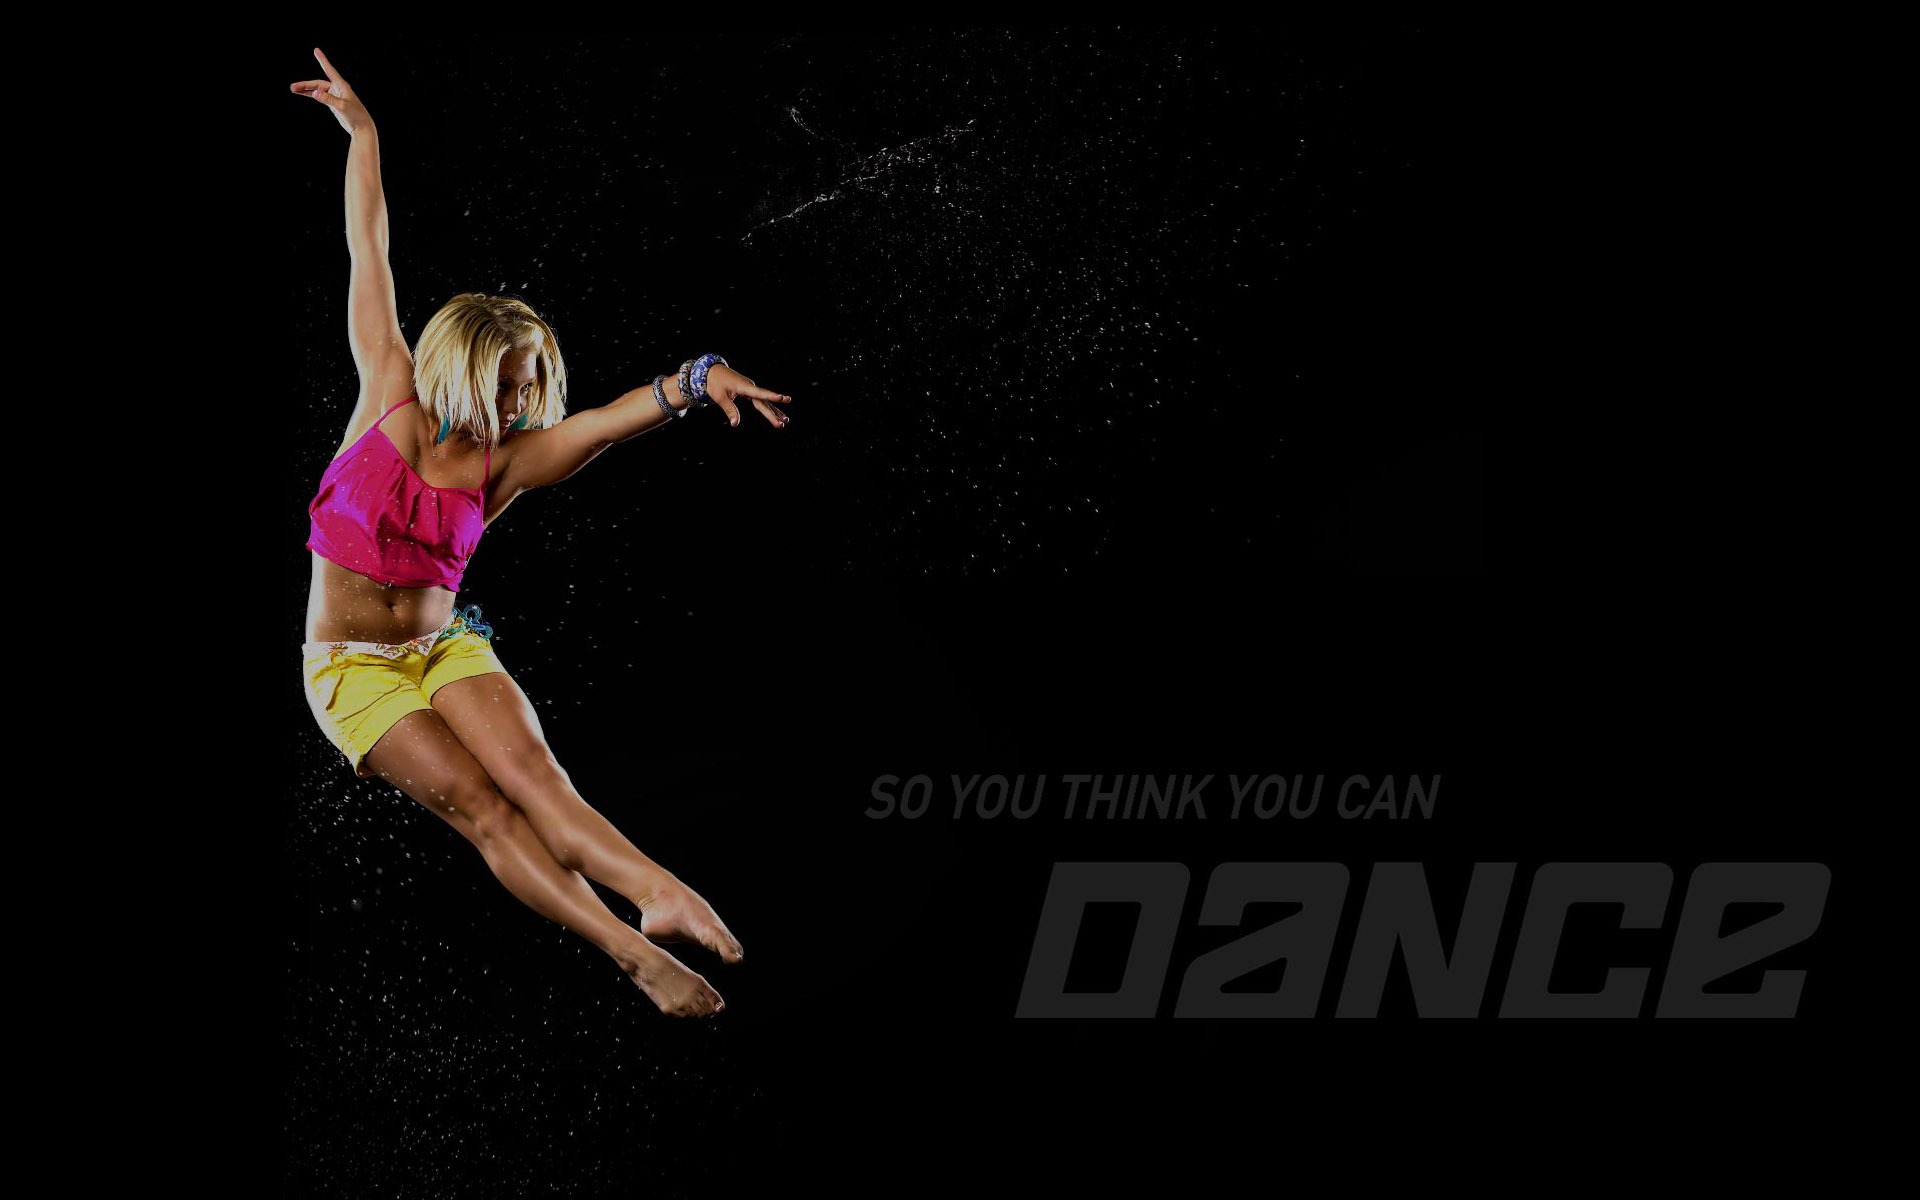 So You Think You Can Dance wallpaper (1) #5 - 1920x1200